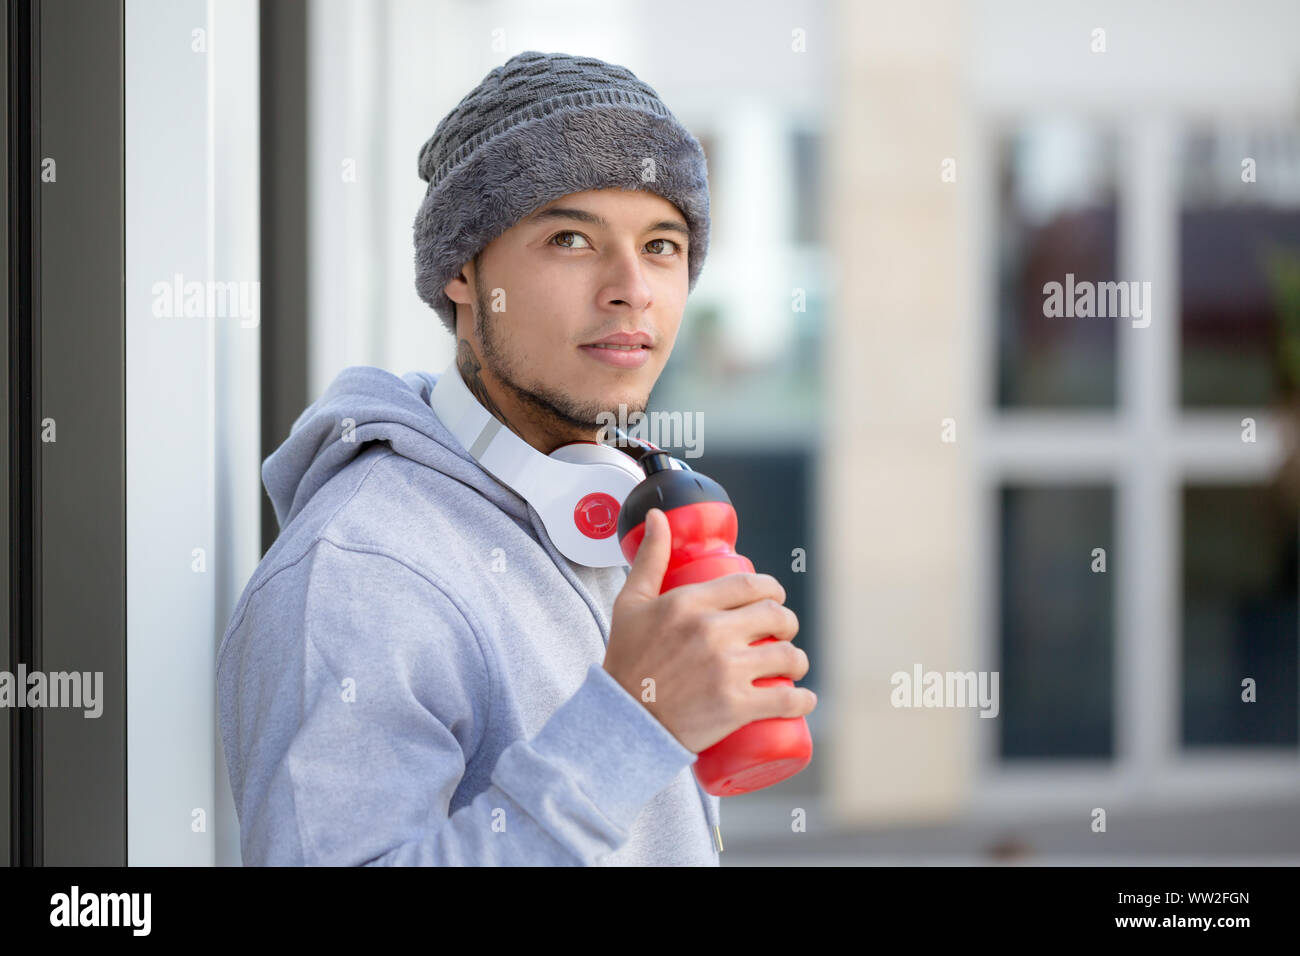 Sports training young latin man thinking emotion runner looking up copyspace copy space outdoor Stock Photo